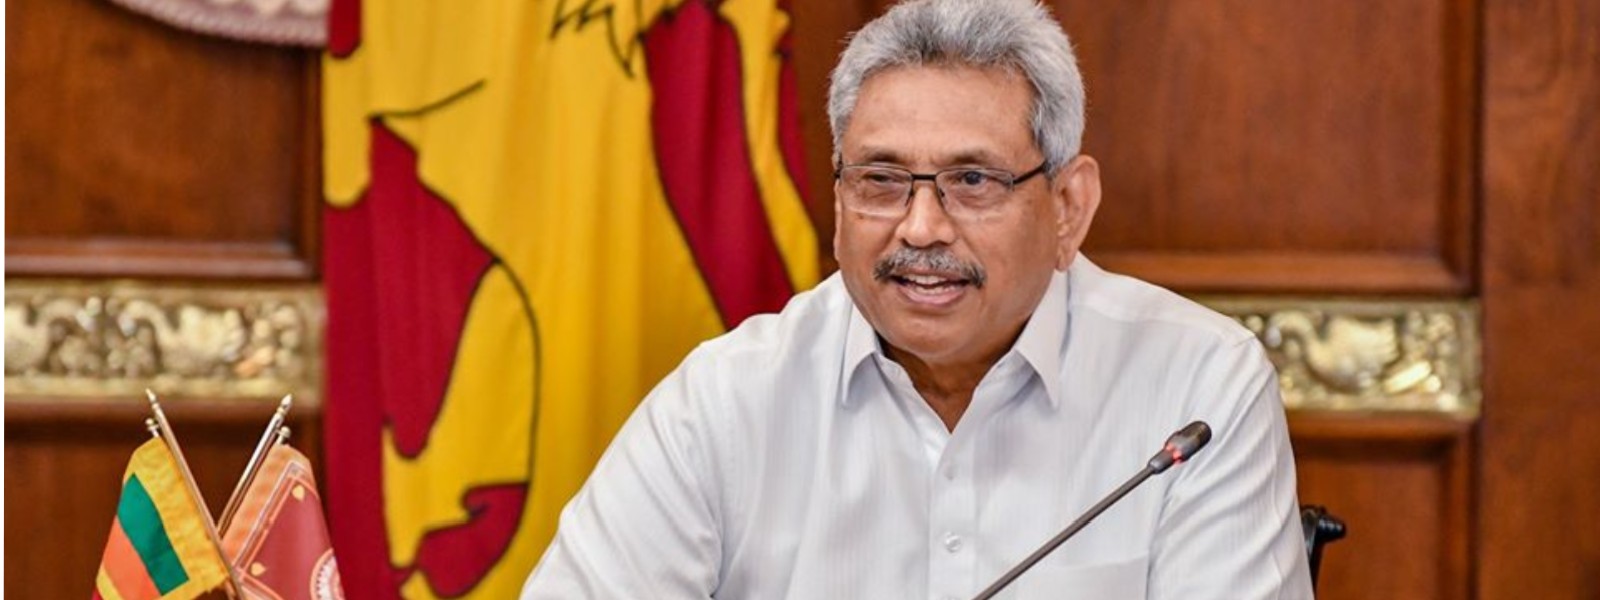 State Banks must contribute to revive Sri Lanka’s economy, says President